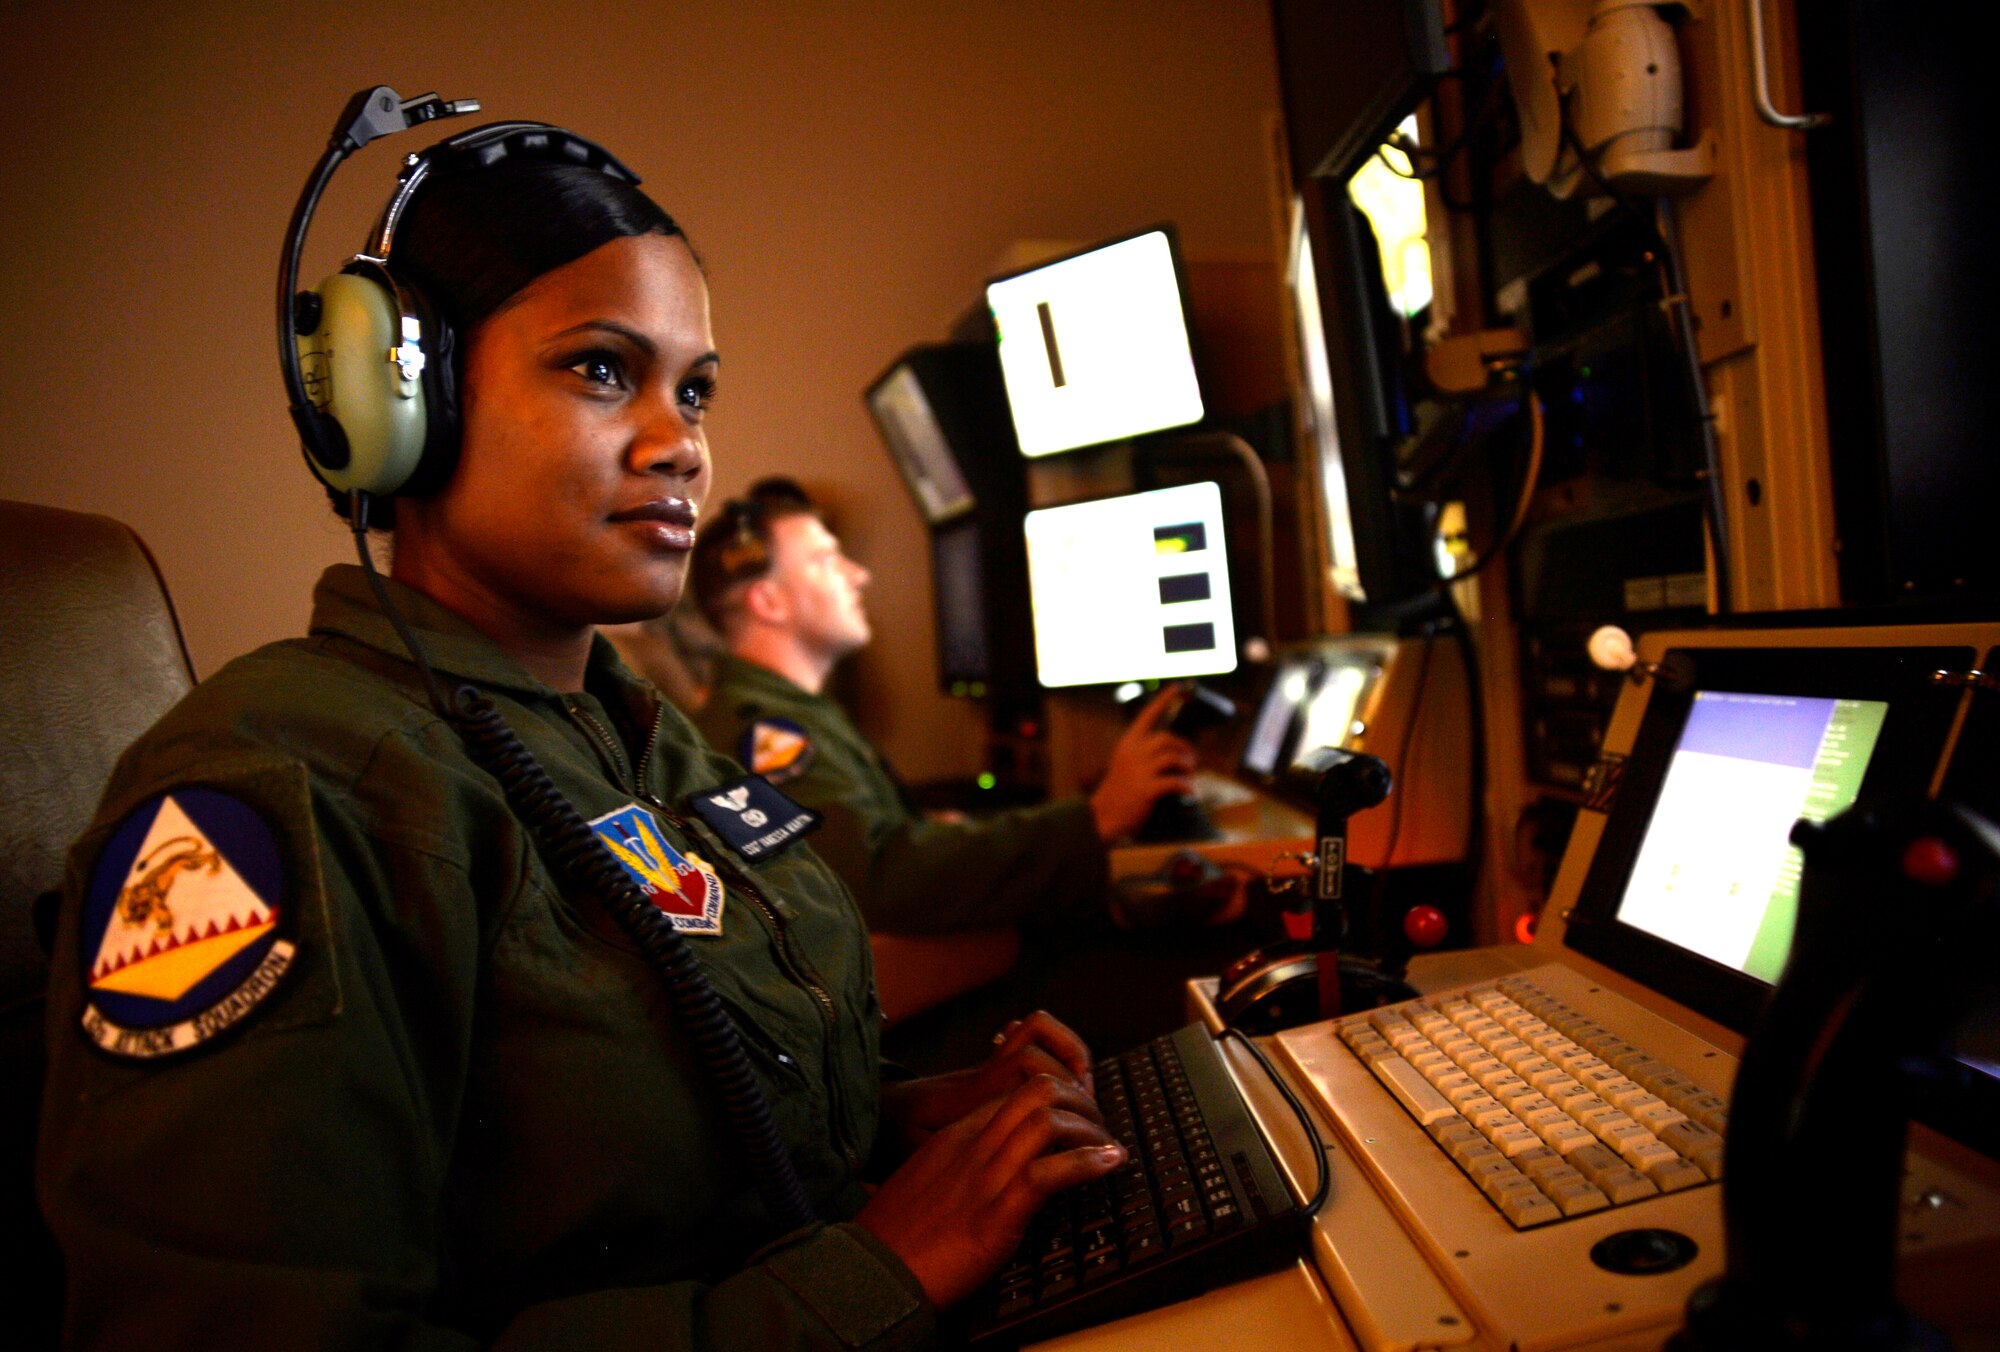 Staff Sgt. Vanessa, 42nd Attack Squadron sensor operator, front, and Capt. Andrew, 18th Reconnaissance Squadron pilot, follow a vehicle with a remotely piloted aircraft in a flight training simulator May 28, 2014. The two-person crew was selected to fly the 65th air combat patrol, an initiative set by then Secretary of Defense Robert Gates Dec. 23, 2009 (Last names have been withheld for security purposes). (U.S. Air Force photo by Staff Sgt. Adawn Kelsey/Released)